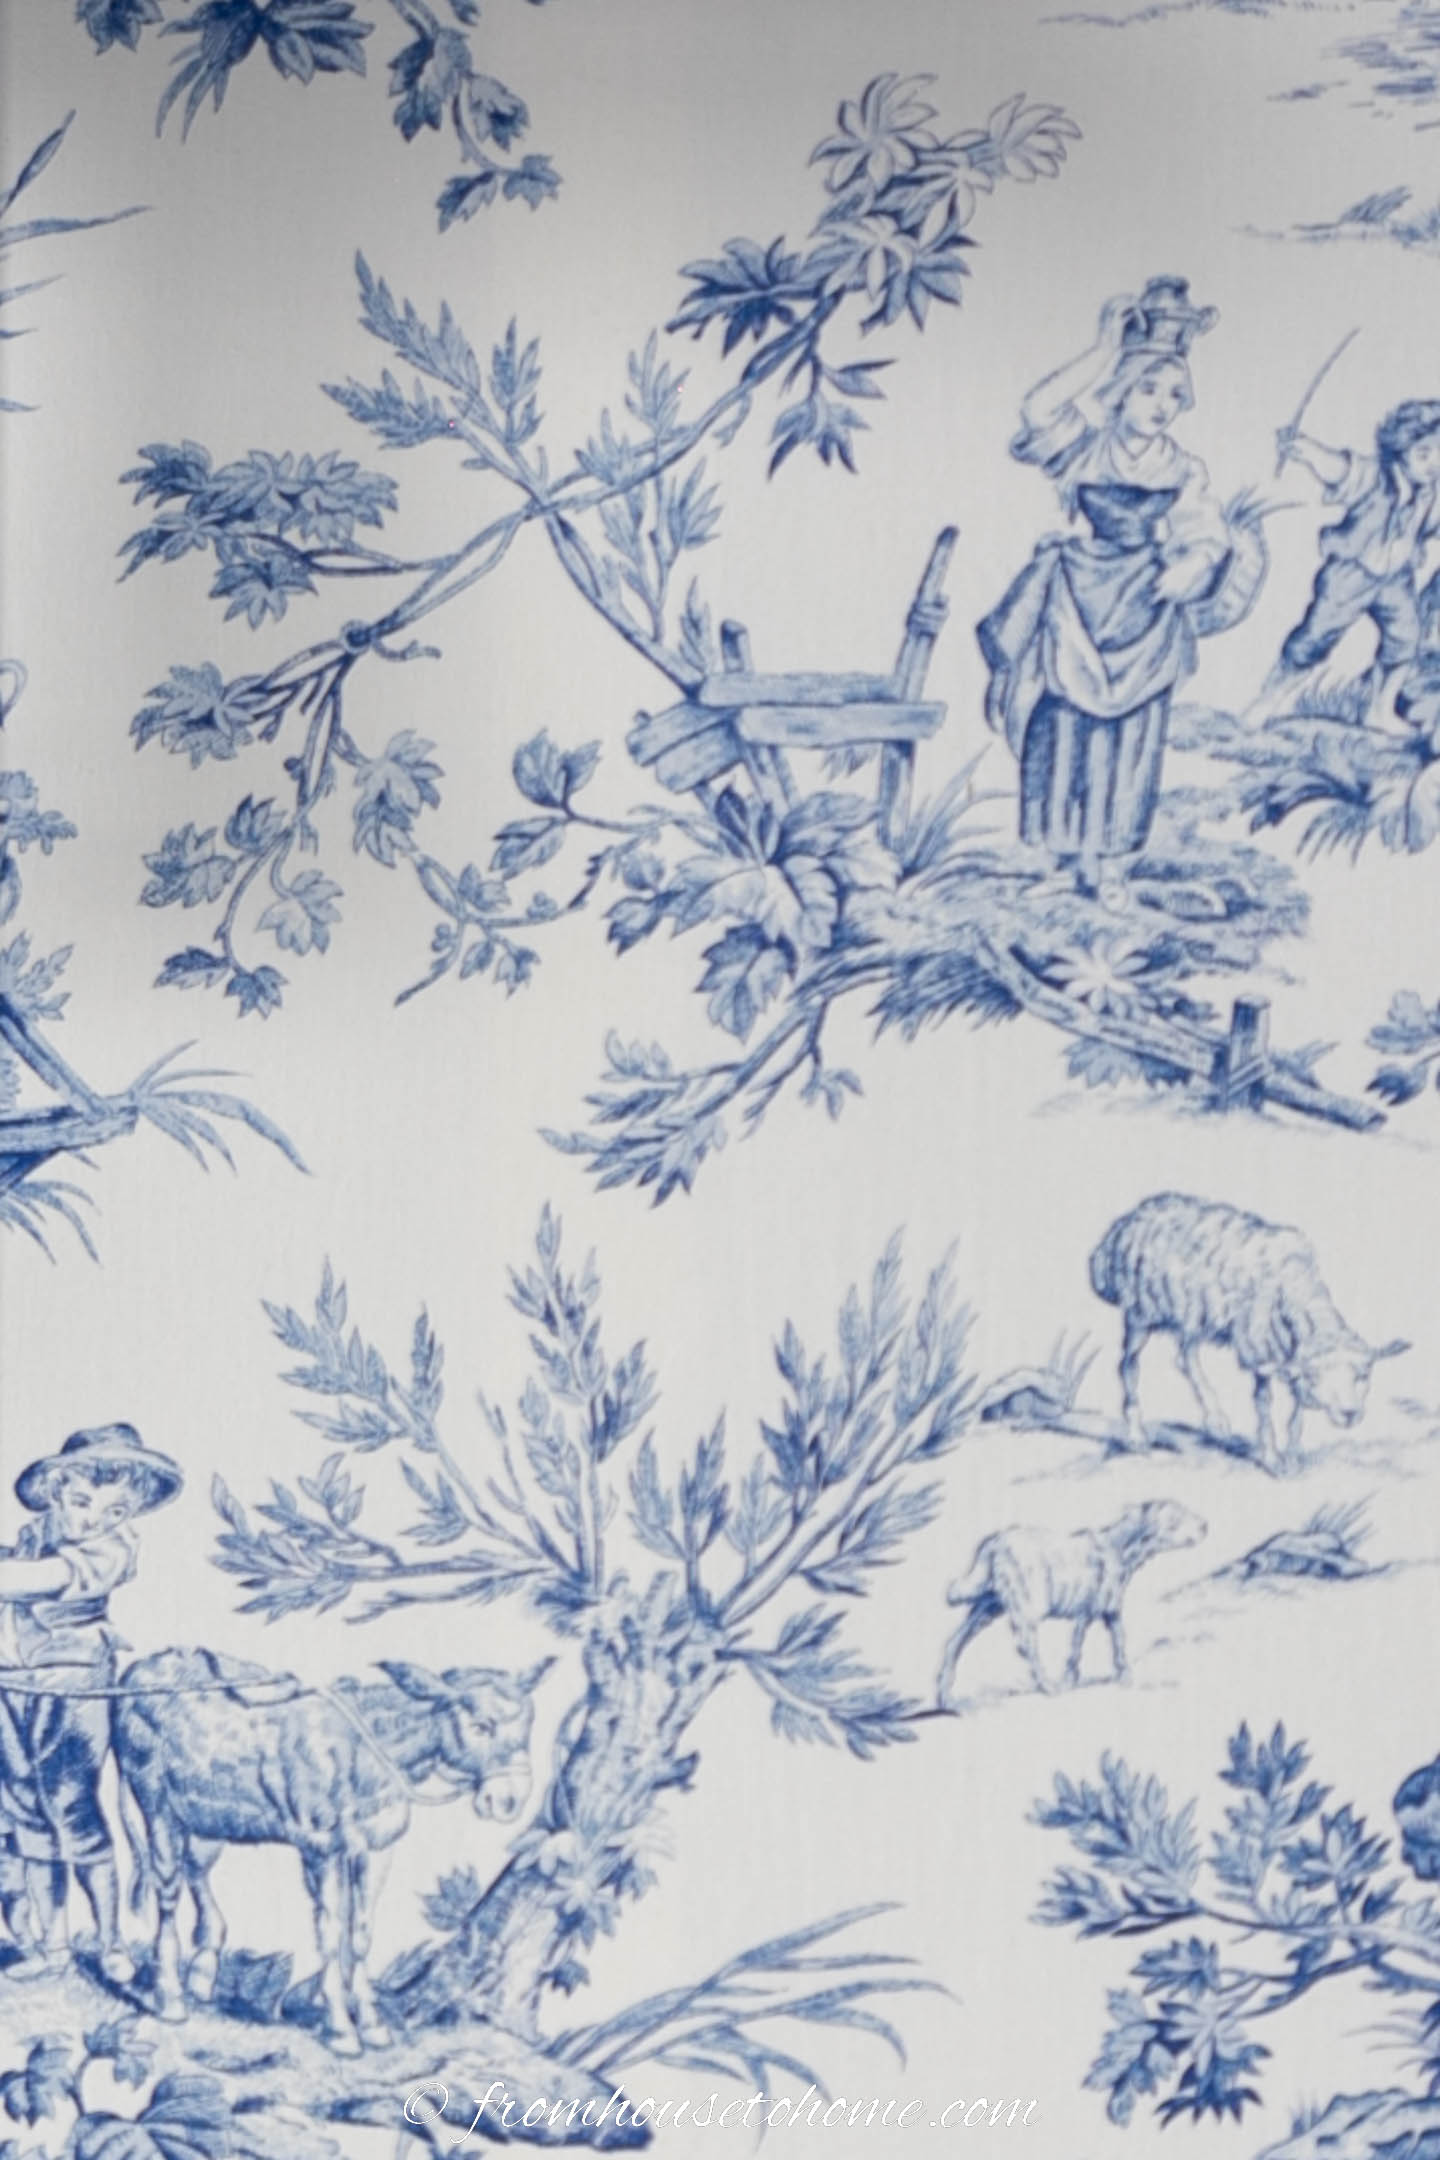 Blue and white toile pattern